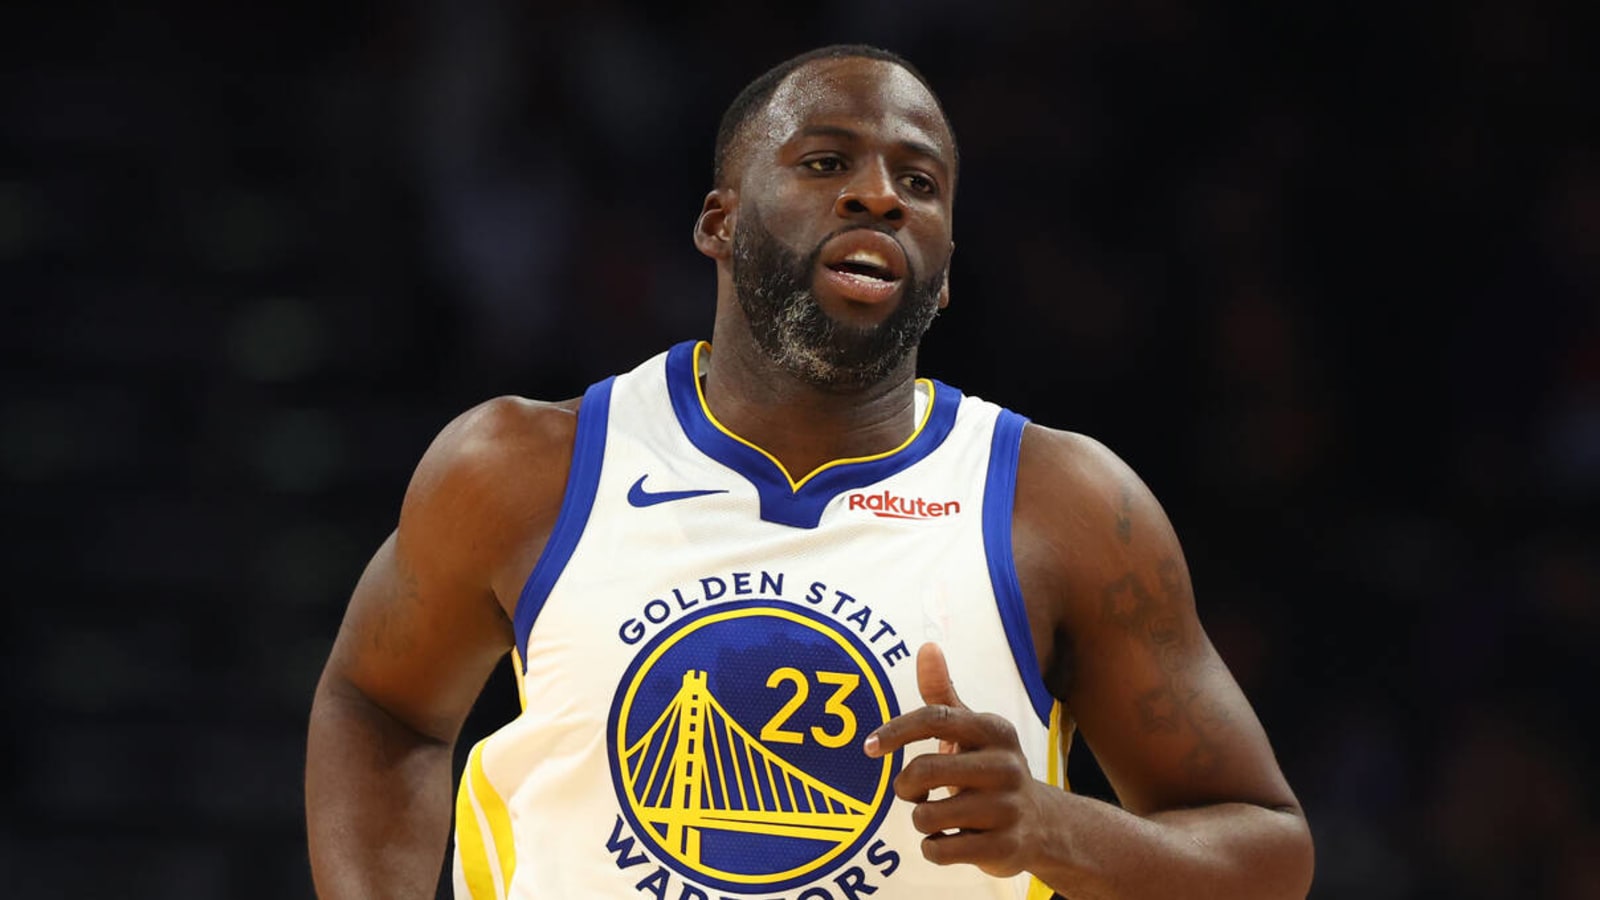 Draymond Green’s decision to attend LeBron James’ birthday party will have rumors swirling